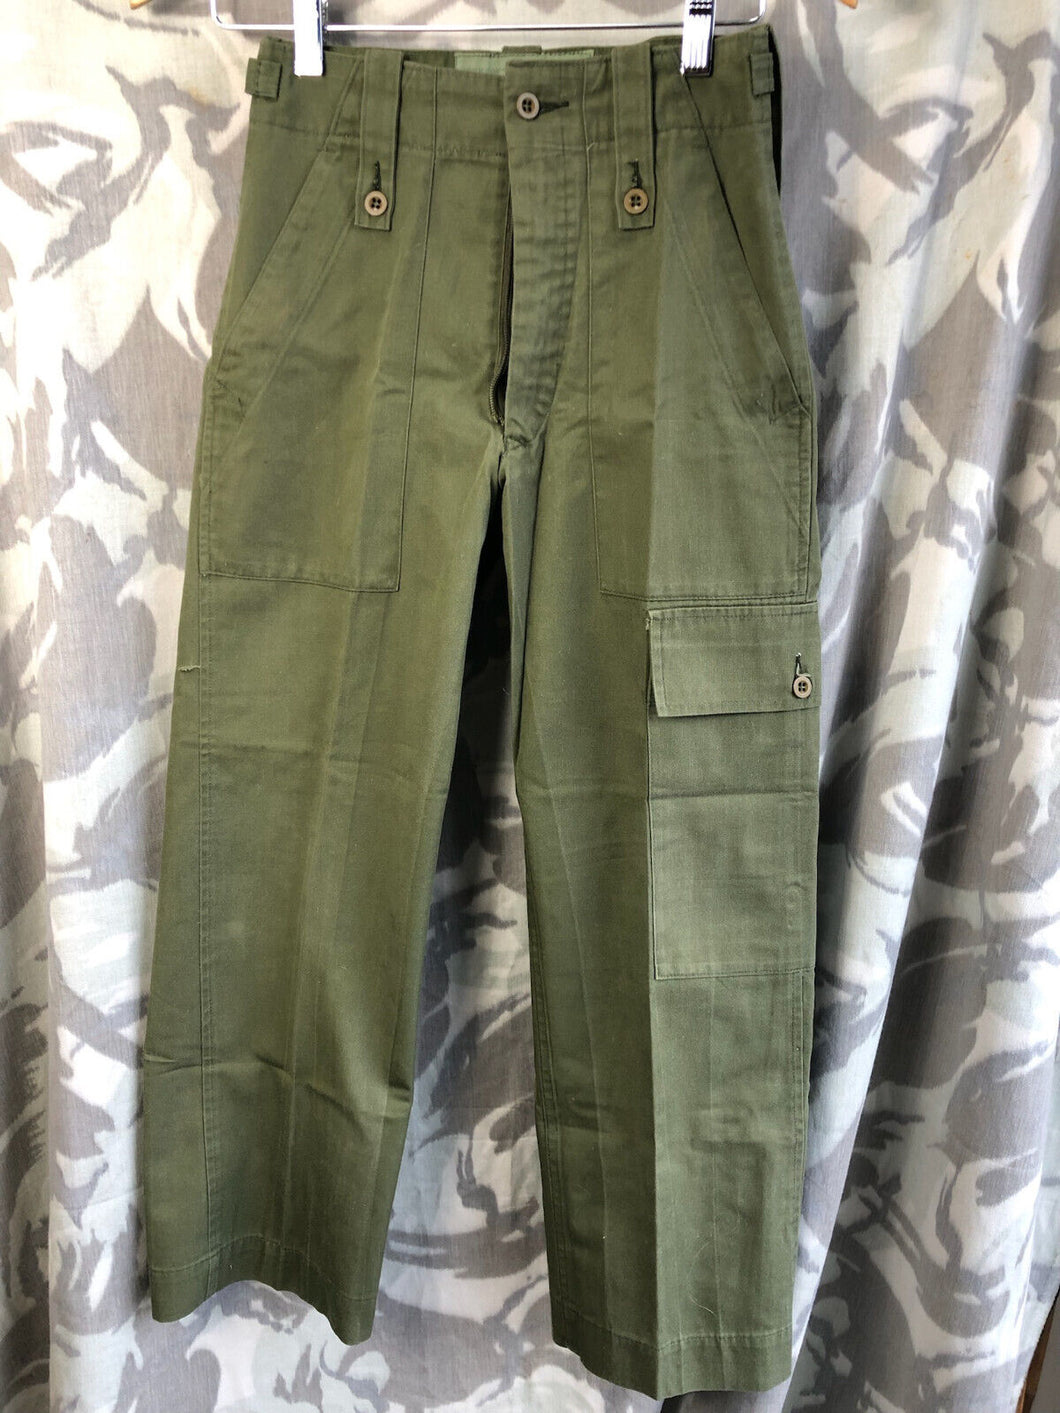 Genuine British Army OD Green Fatigue Combat Trousers - Size 01 - 26